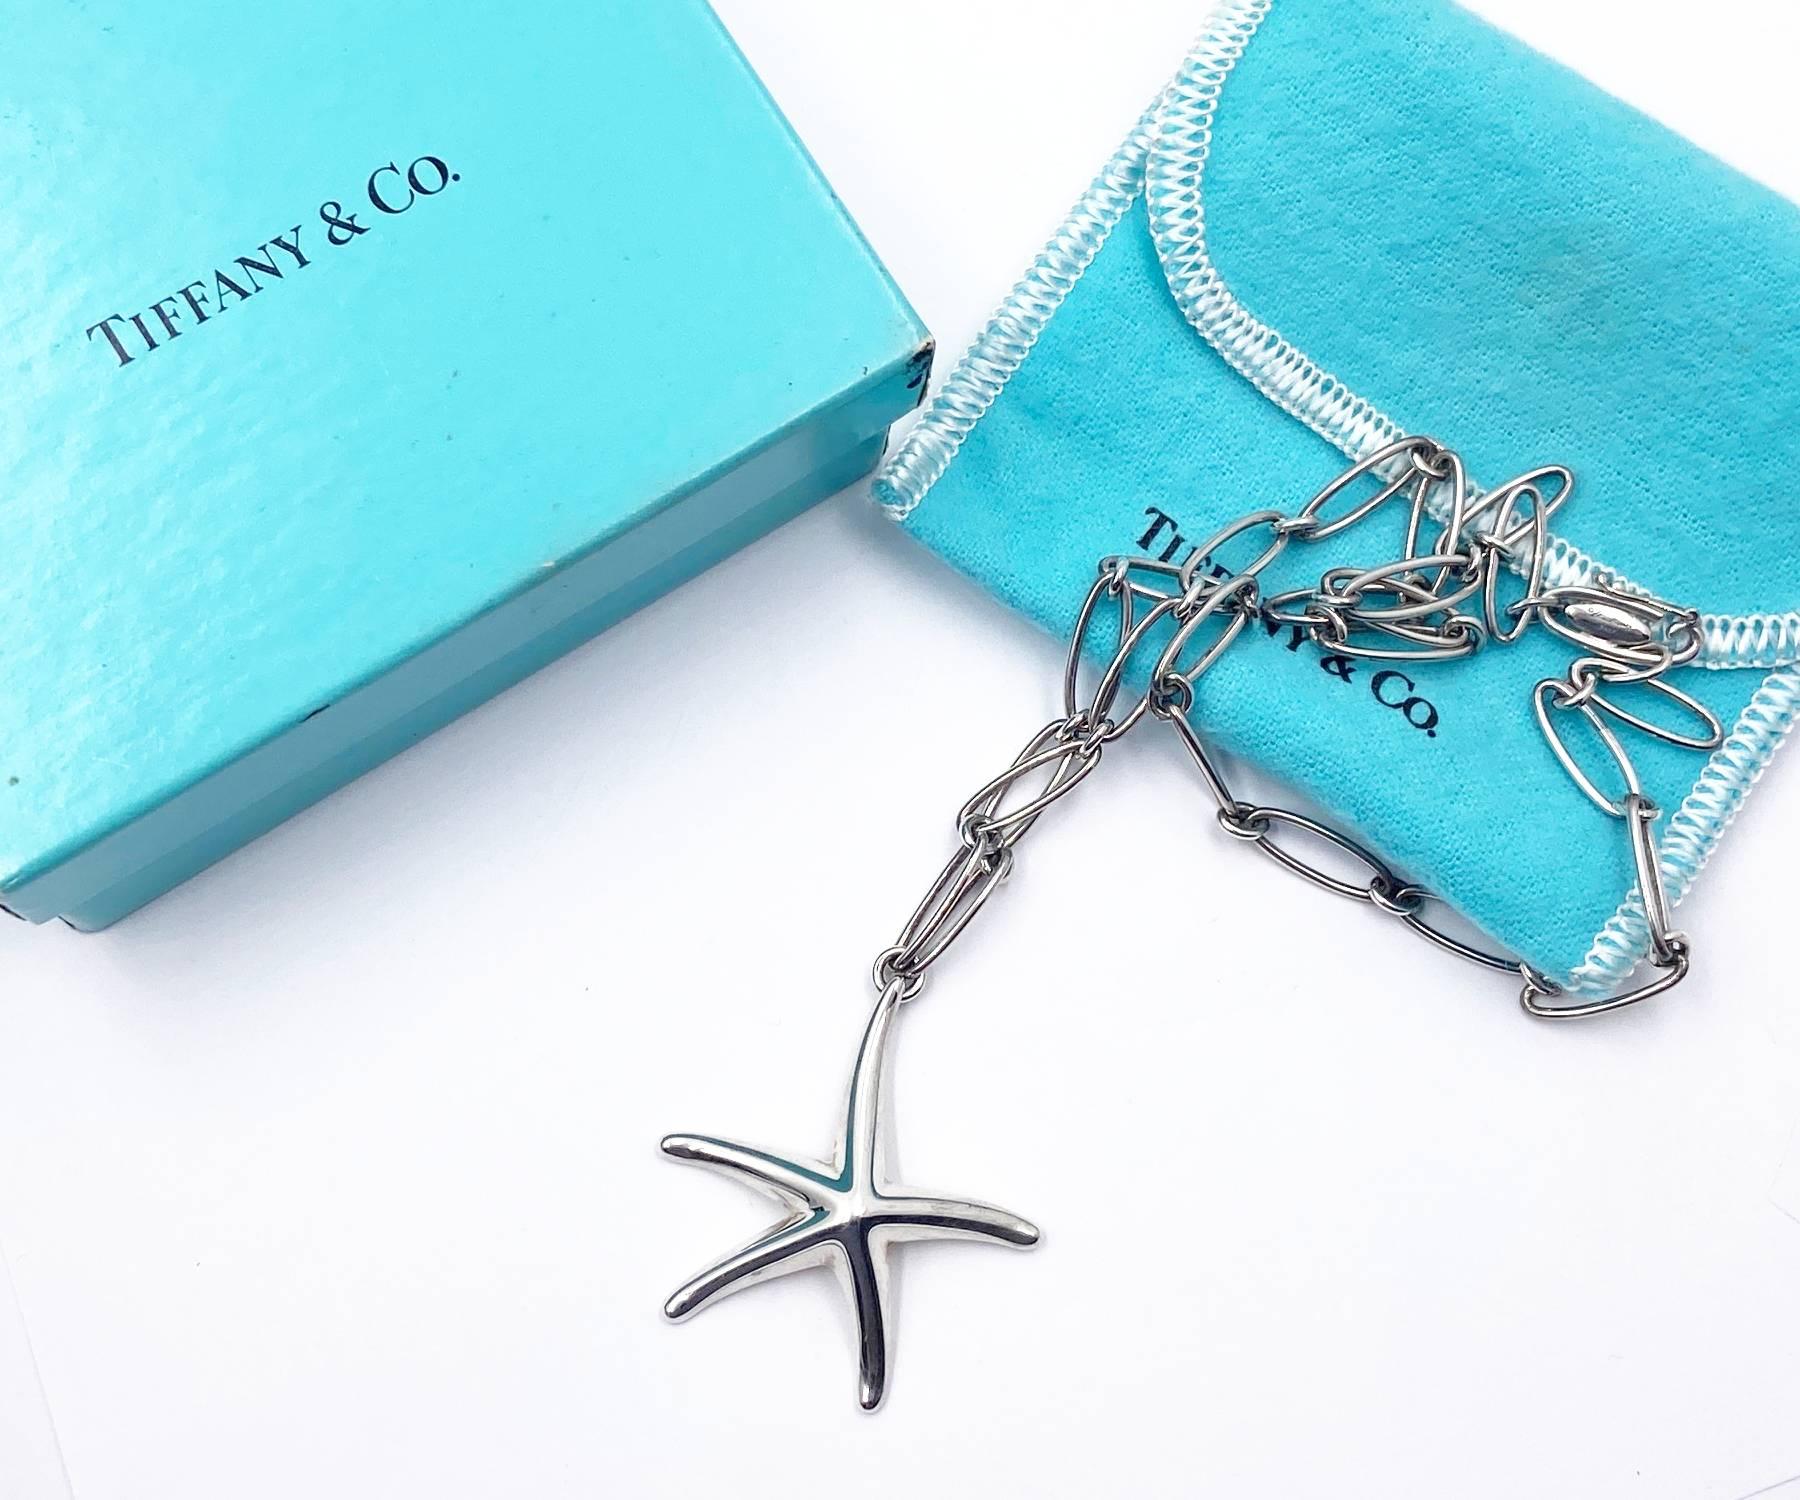 Tiffany &Co 925 Starfish Large Pendant Chain Necklace

*Marked Tiffany &;Co, Elsa Peretti and 925
*Made in Spain
*Comes with original pouch and original box

-Chain is approximately 16″
-Pendant is approximately 1.5″ x 1.5″.
-Very classic and